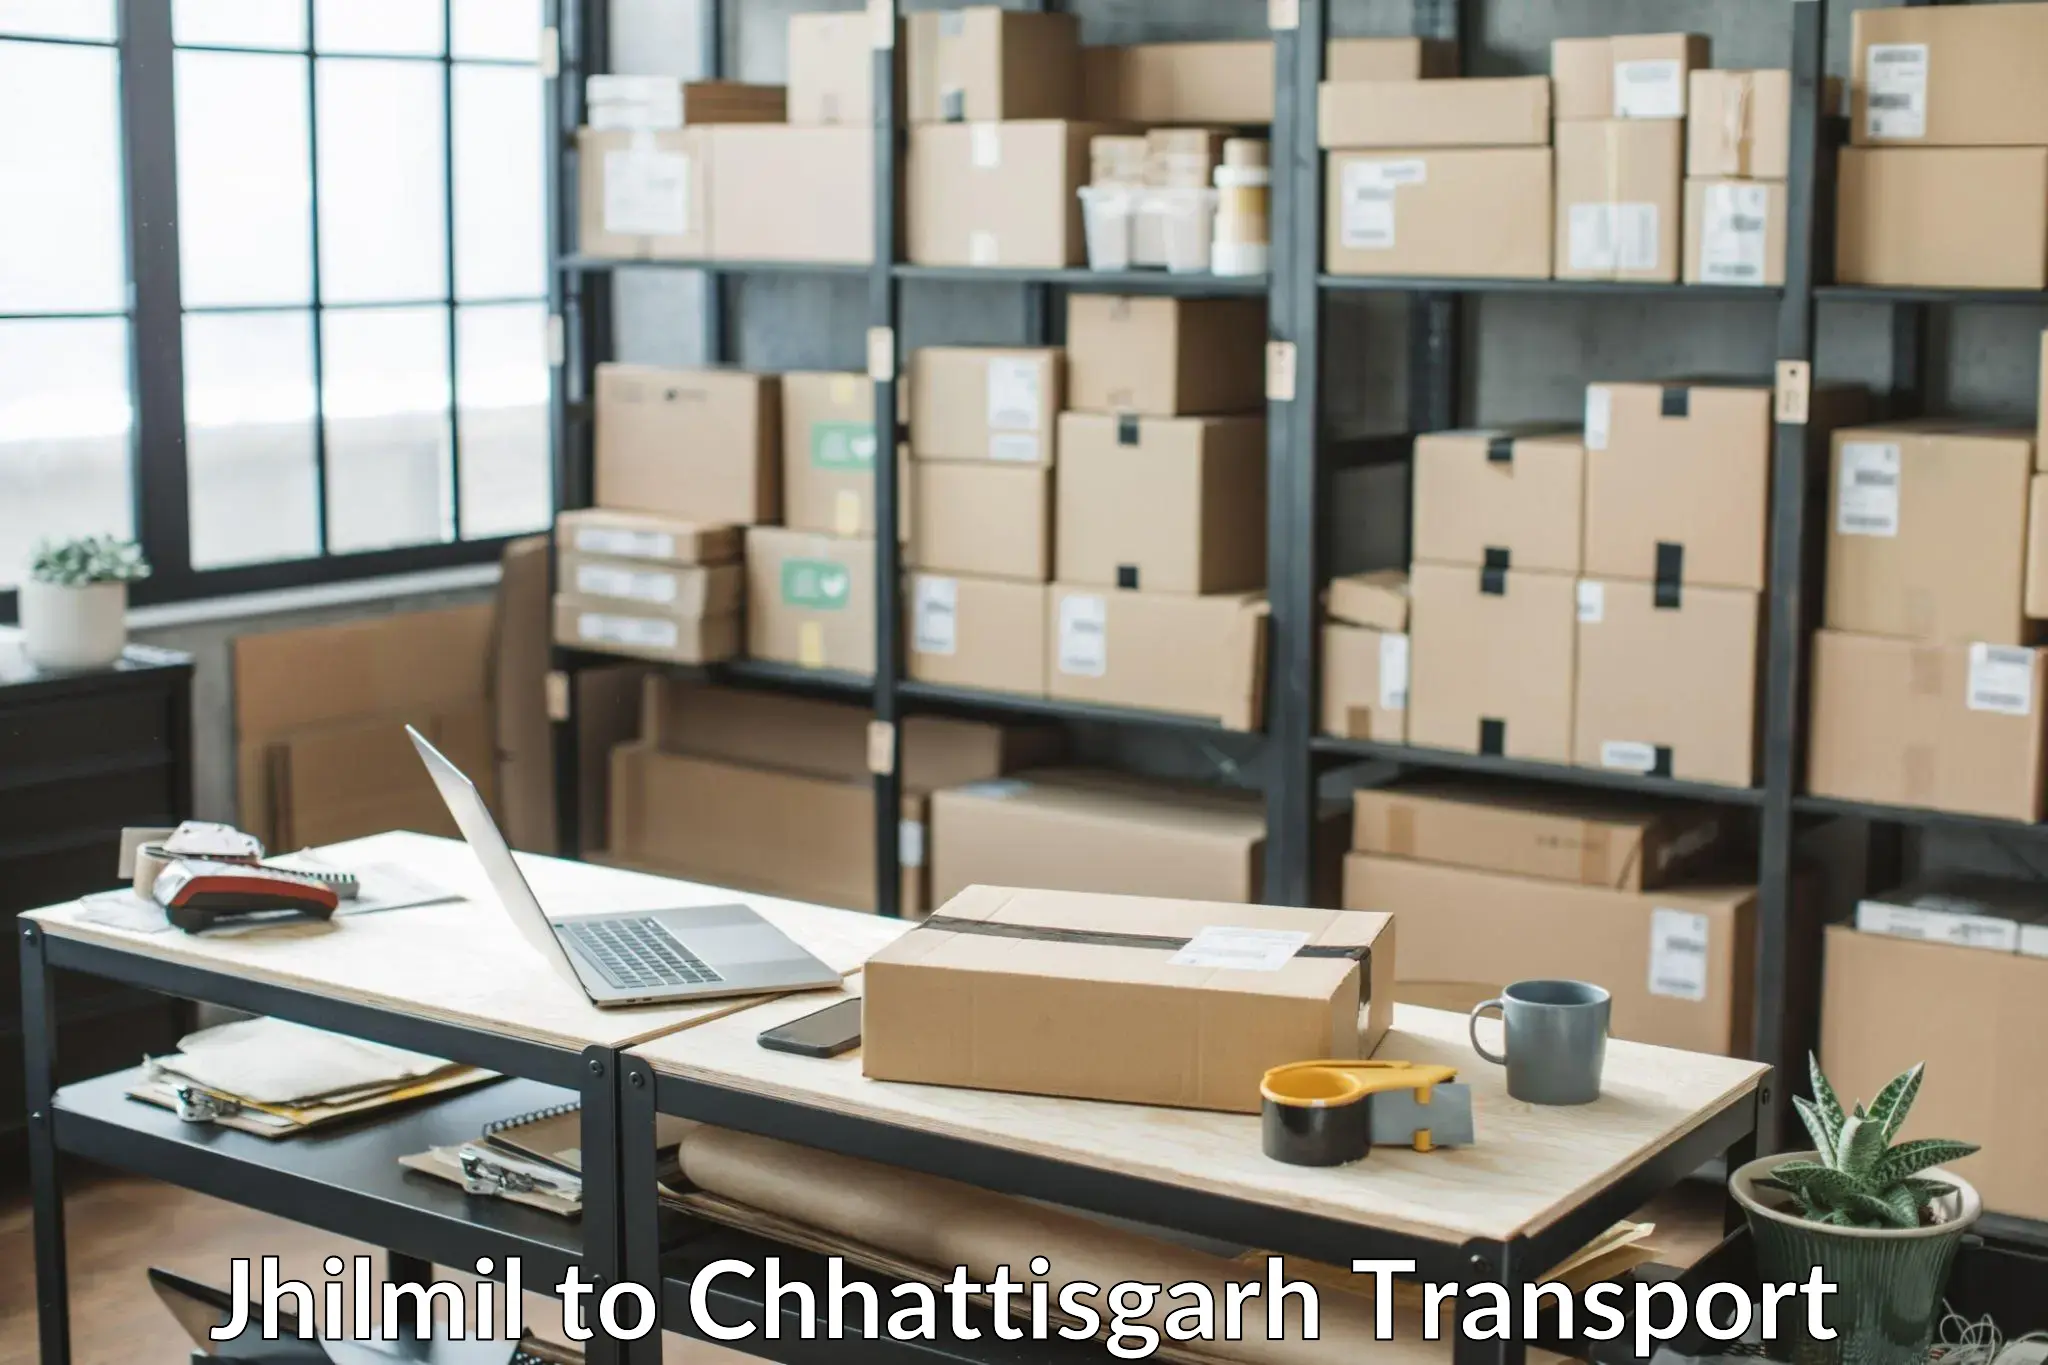 Truck transport companies in India Jhilmil to Raigarh